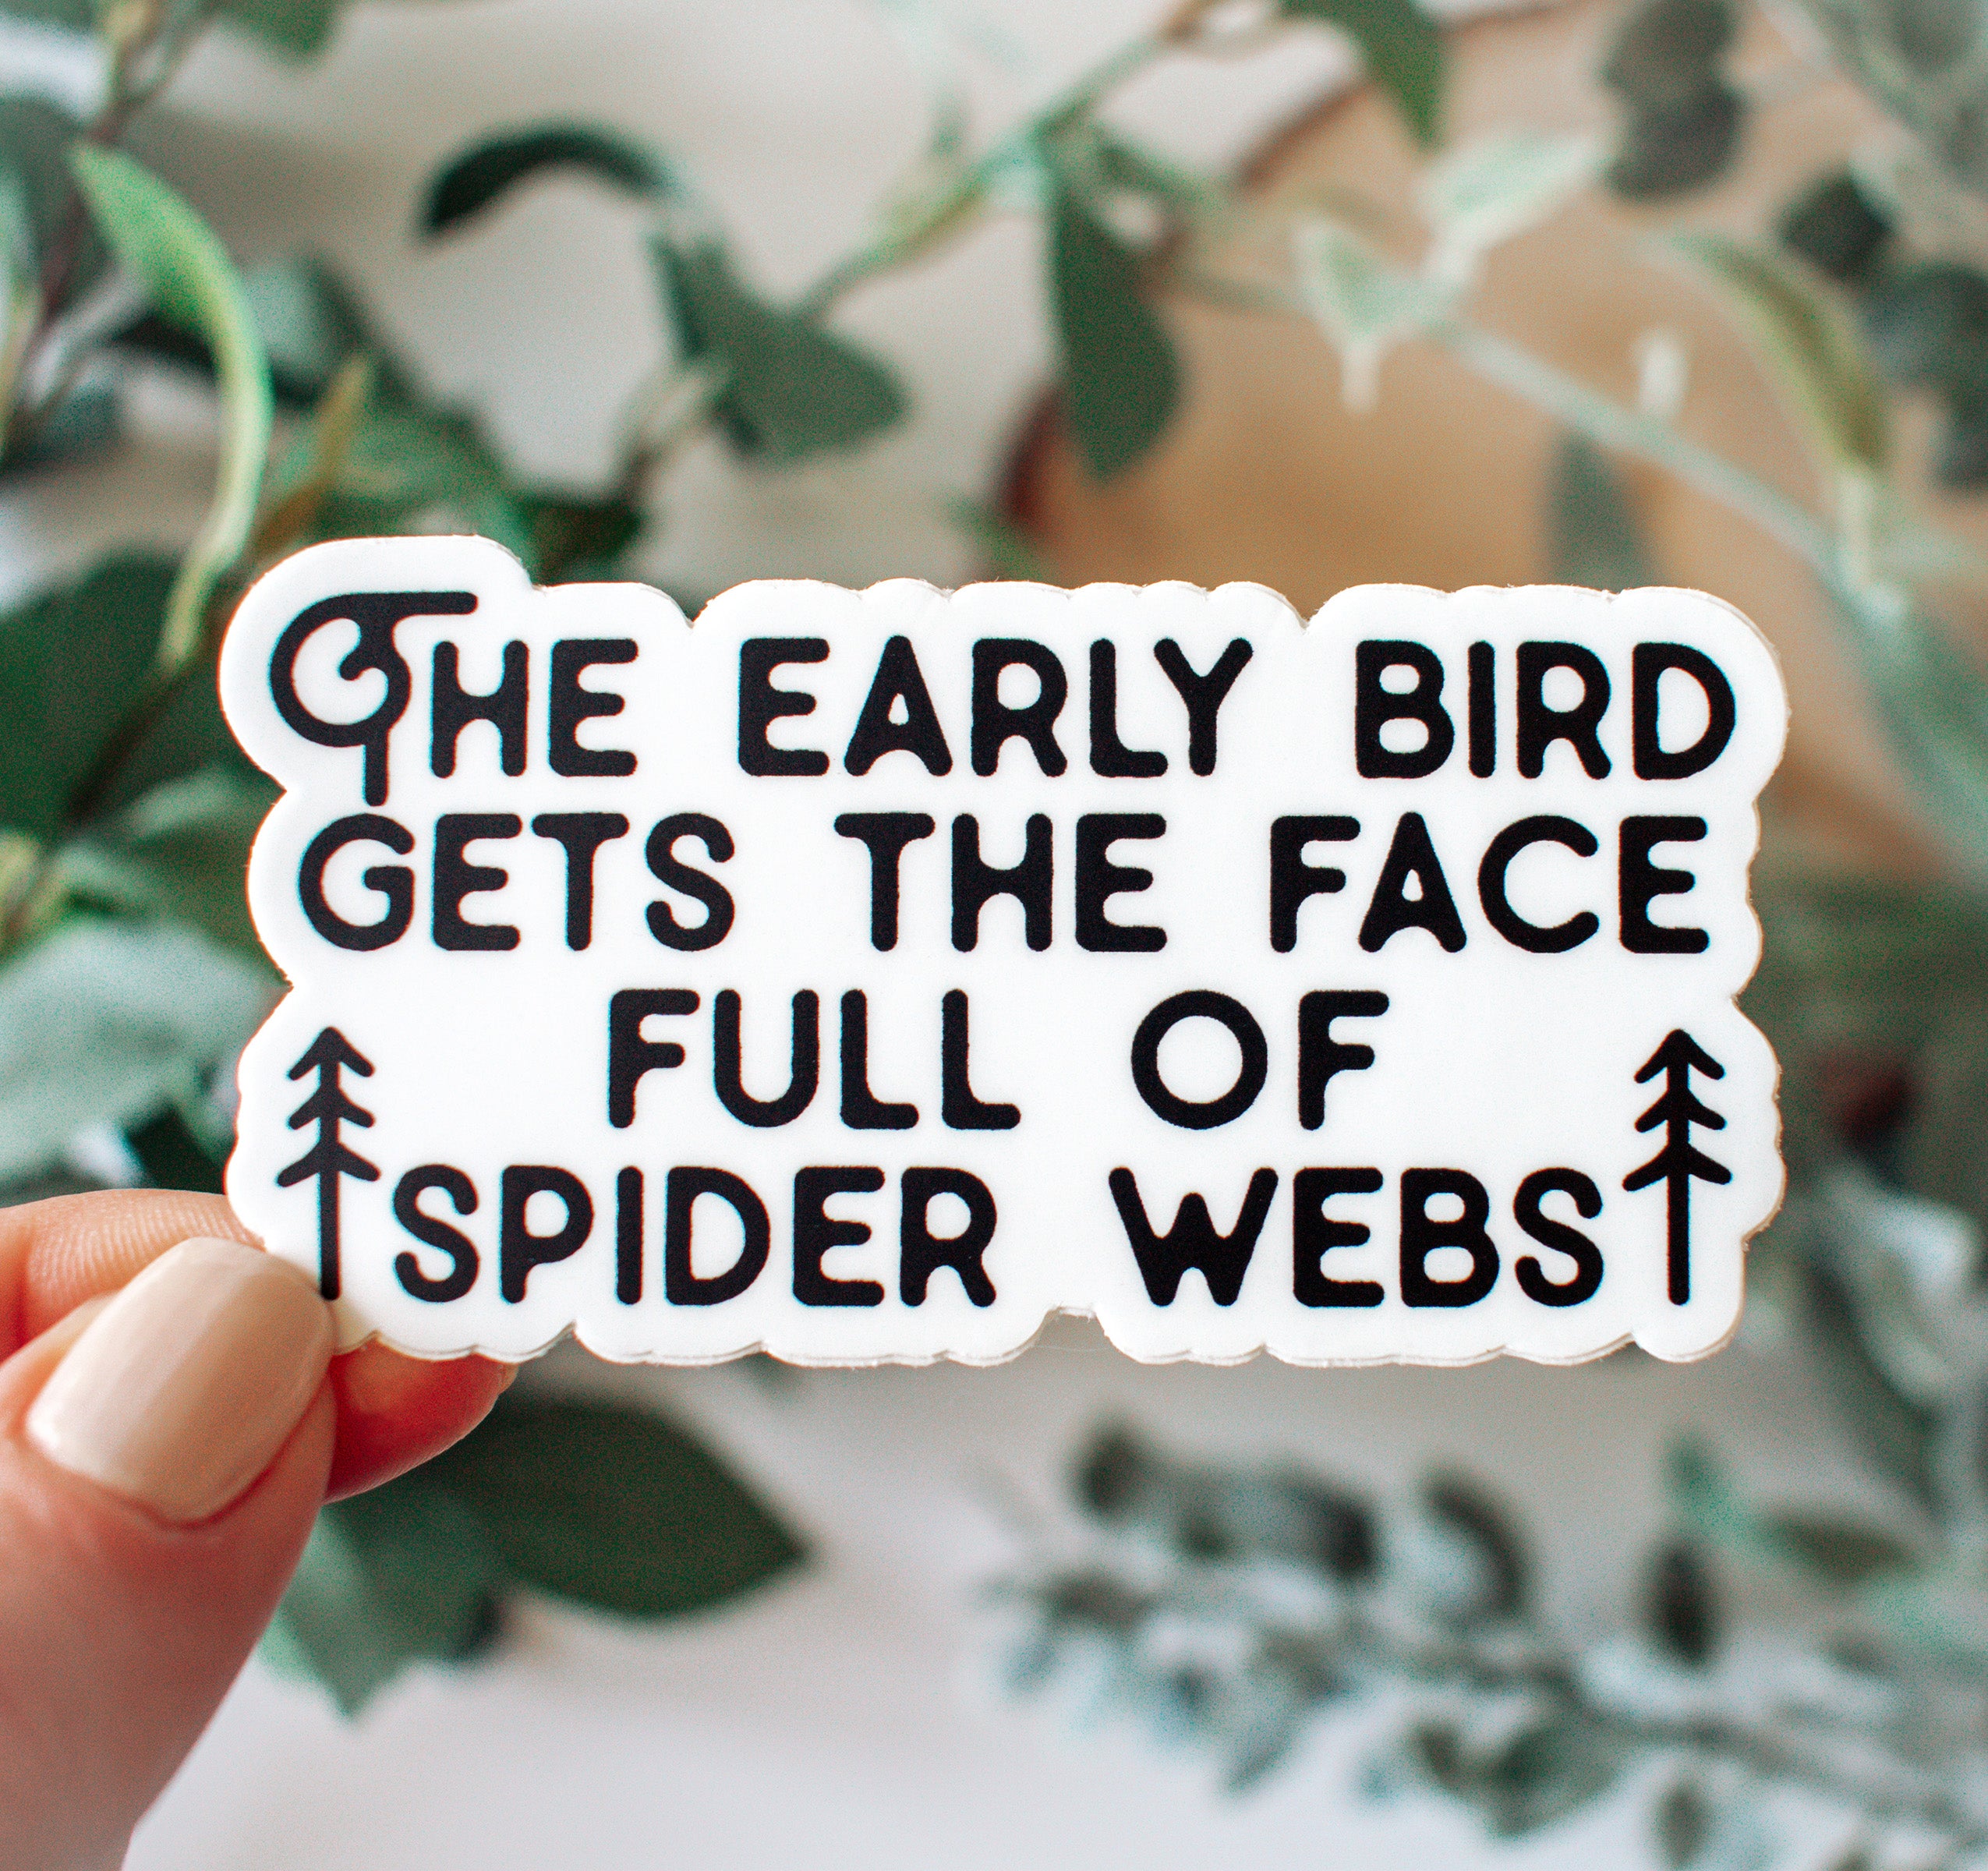 The early bird gets the face full of spider webs vinyl sticker